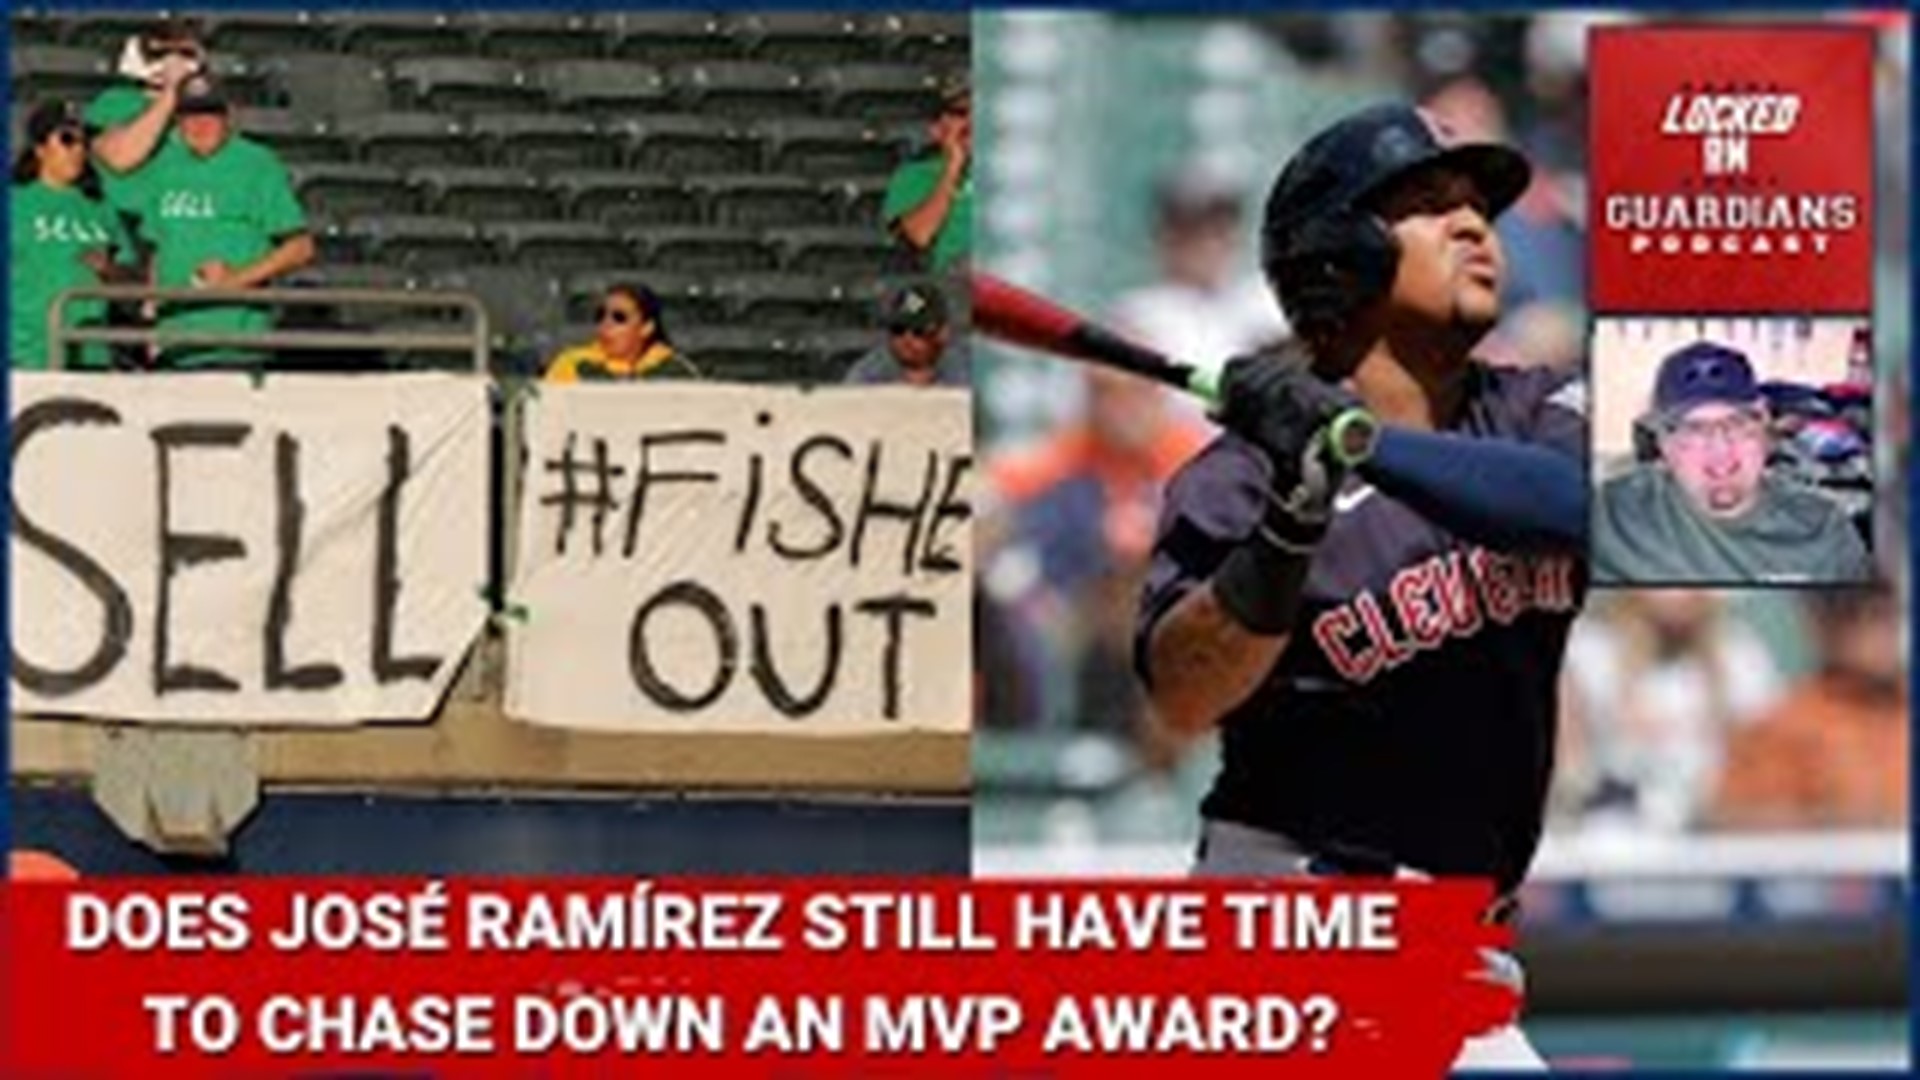 Shohei Ohtani took home the 2023 AL MVP award unanimously. Jose Ramirez finished in 10th place. We take a look on if Jose still has the time to win an MVP.